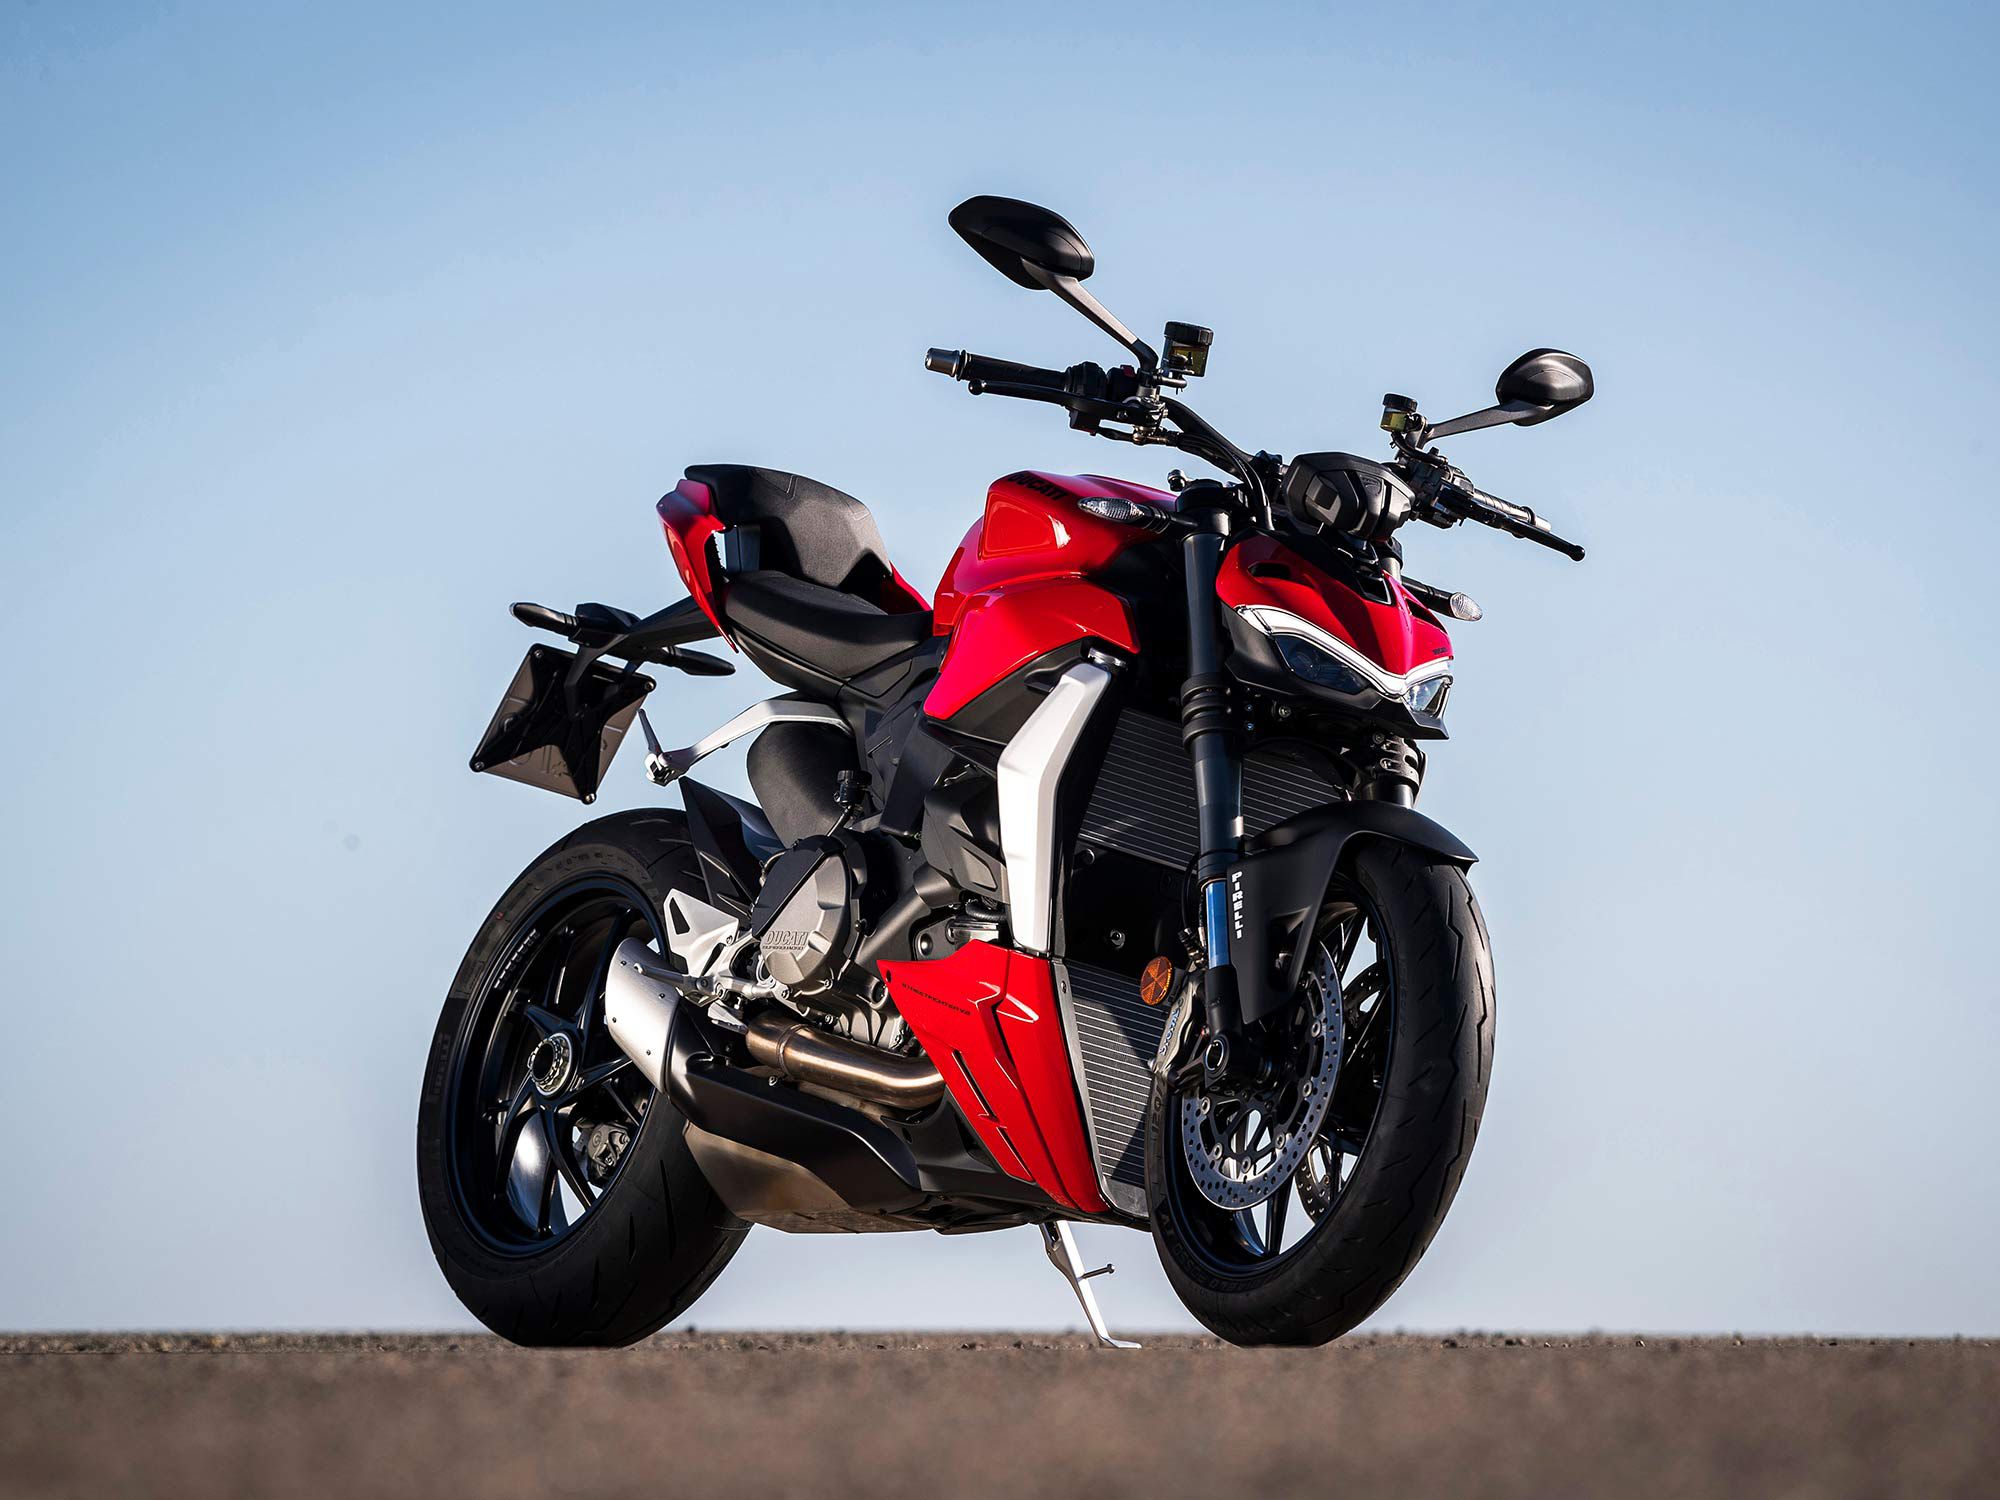 The Ducati Streetfighter V2 is essentially a stripped-down, bare-skinned version of the Panigale V2 sportbike intended as a more practical option to its Streetfighter V4 lineup.